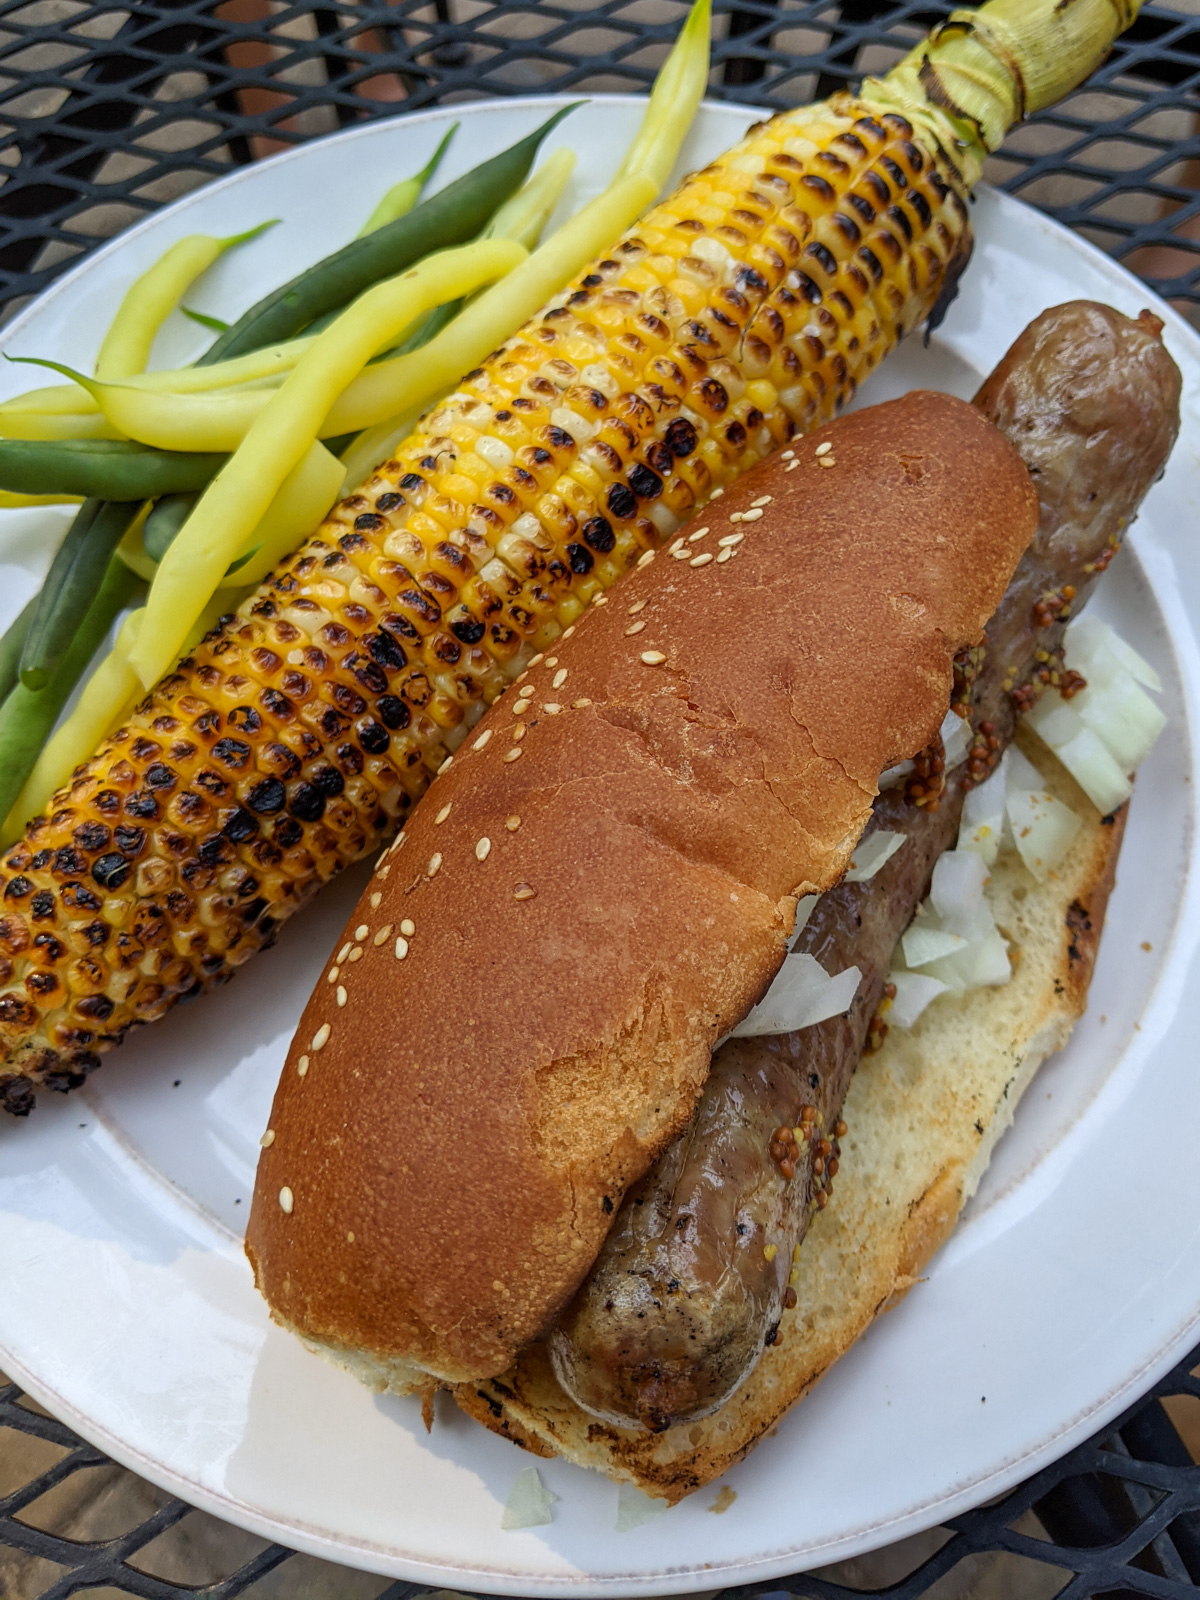 A dinner plate with charred corn on the cob, a brat in a bun and garden green beans.